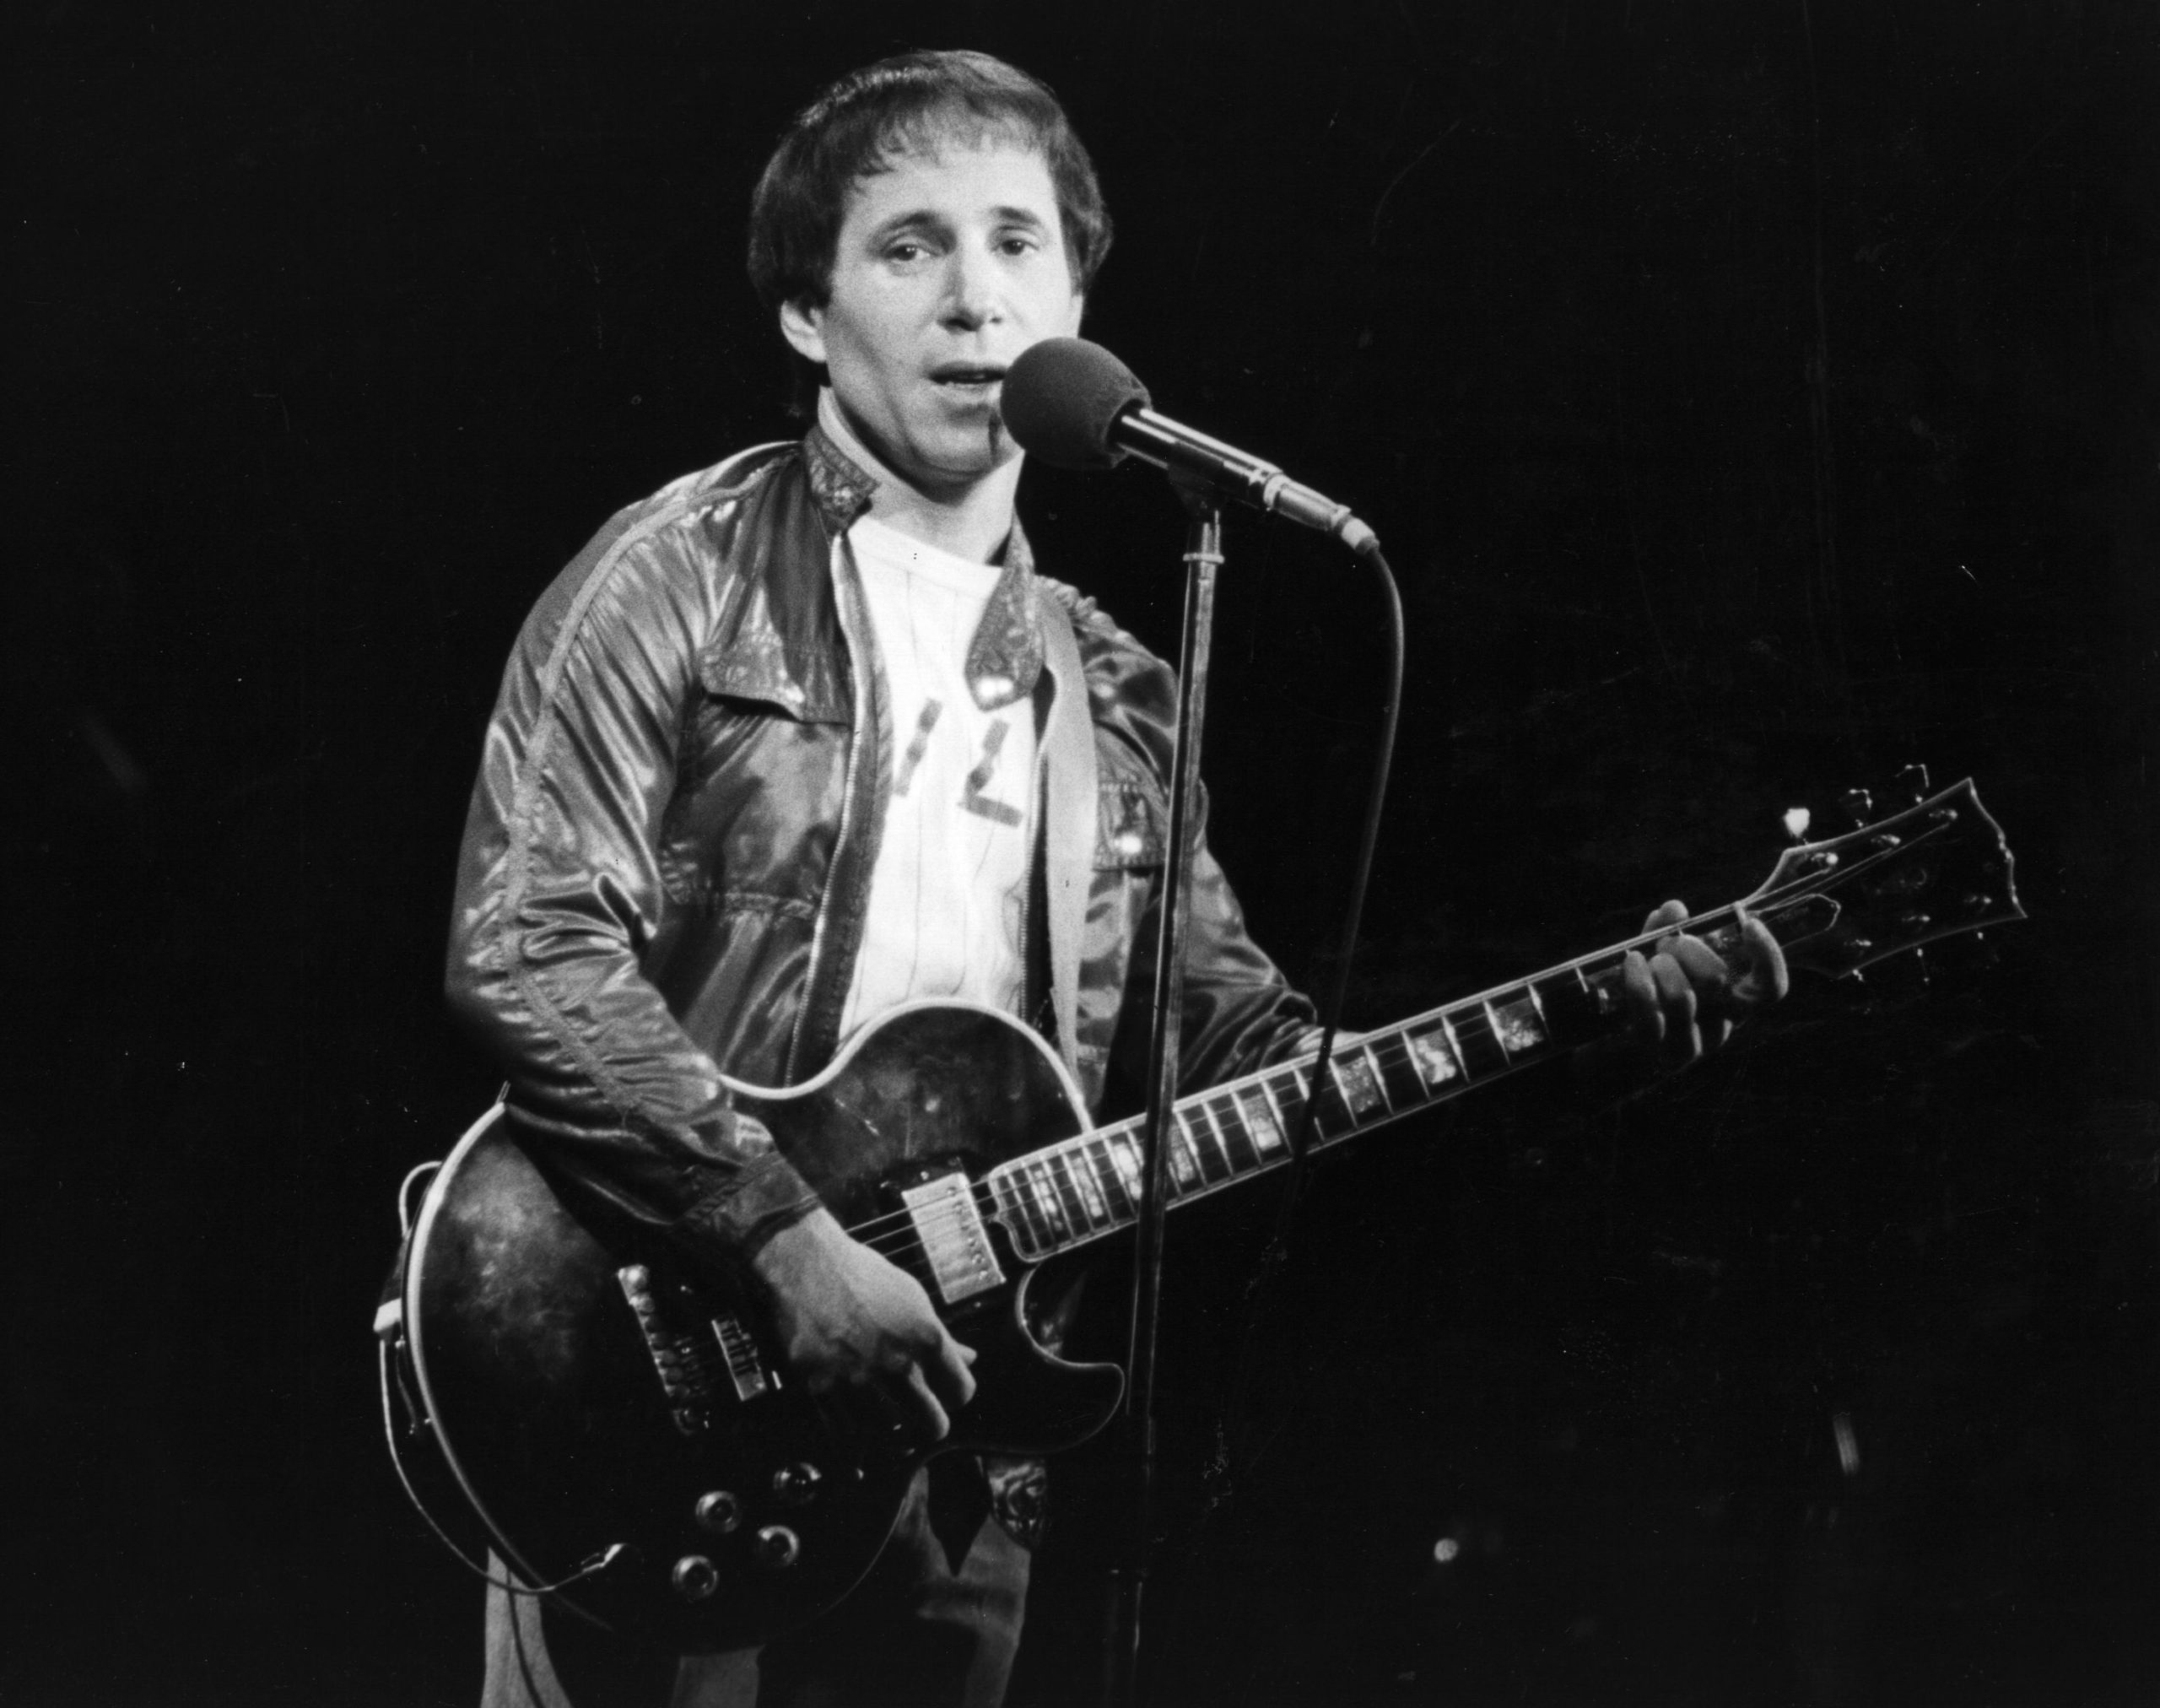 circa 1980:  American pop singer and songwriter Paul Simon performing in London, during a series of solo concerts with a backing band and chorus. During the previous four years he was involved in a film, 'One Trick Pony', which he wrote and starred in. He now lives with actress Carrie Fisher, whilst his eight year old son Harper lives nearby in New York with Paul's ex-wife Peggy.  (Photo by Keystone/Getty Images)